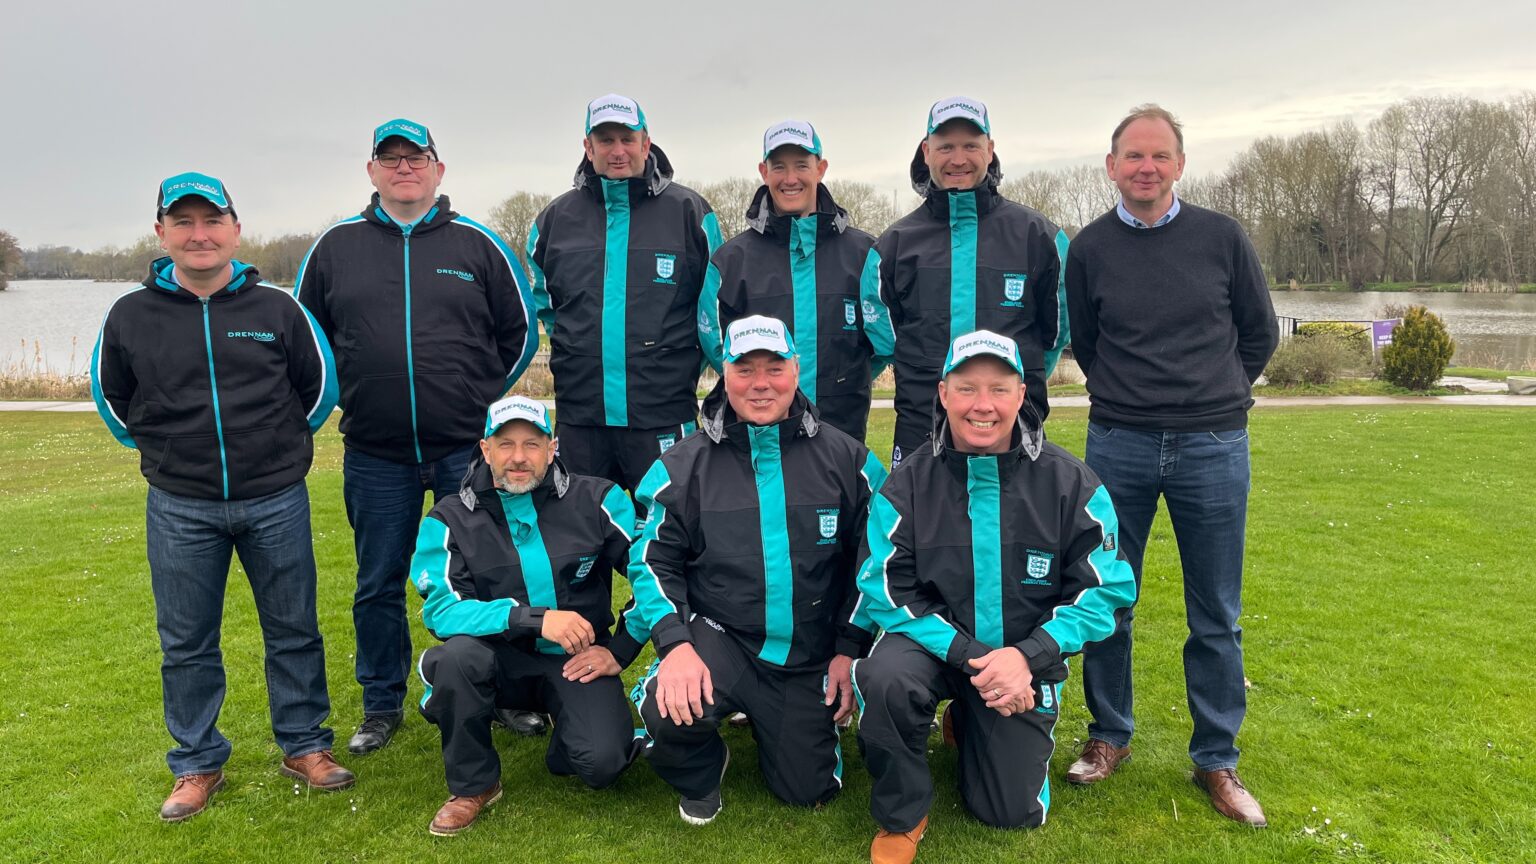 The Angling Trust and Drennan International are proud to announce a new four-year sponsorship deal with the England Feeder team. Led by manager Dean Barlow since 2019, the Feeder team earned a solid silver medal in the World Championships in Belgium last October and are currently ranked No.1. The new deal – one of the largest in international fishing history – will see the Drennan England Feeder squad supported for the next four World events, including this year’s competition in Serbia in early July. Drennan has a long history of supporting our England teams, backing the Nations, Euro, and Youth outfits for almost three decades from their first sponsorship in 1993. During this time, the partnership with the England Nations squad at World Championships alone saw 16 podium finishes for the team and 17 individual medals, including five golds for Alan Scotthorne and four for Bob Nudd. This year the Feeder team – consisting of skipper Mick Vials, Steve Ringer, Rob Wootton, Lee Kerry, Adam Wakelin, and Will Freeman – hope to add more gold to that unique record and increase their own tally of 13 hard-fought medals. Peter Drennan said: “We’re very pleased and proud to have agreed a long-term sponsorship deal with the England feeder team, ranked at number one in the world. With an astute manager in Dean Barlow and a squad of superstar anglers, we can see them adding to their impressive haul of medals and retaining their ranking. “As always, our aim is to assist in any way we can and provide back up without interference. There’s a great team spirit here and a happy camaraderie that extends to everyone involved. Some of our anglers and videographers are already looking forward to filming the next Feeder World Championships in Serbia, so the feeder team’s exploits can be shared with a wider audience. Good luck to them!” Drennan England Feeder Team manager, Dean Barlow, sees the new deal as a reward for the highly professional standards they impose on themselves. “It means everything to the team when a company with the history and prestige of Drennan believes you are worthy of the investment,” said Dean. “From the management to the fishermen, both on and off the bank, we try to do everything the right way. We’re proud to wear the name which has been associated with England teams for so long.” Steve Fitzpatrick, Angling Trust Head of Competitions & Team England, believes the level of support will only serve to stand the squad in good stead. He said: “This is one of the hardest-working and most professional squads in World fishing. Everyone from the manager to the anglers and all their support team, give 100 per cent effort. This level of commitment isn’t just in evidence during the week of the World Champs but as a year-round ambition to achieving success. The team’s record speaks for itself and this incredible partnership with Drennan will help our quest for gold medals. “I’d like to take this opportunity to thank Peter Drennan and the team at Drennan International for their backing. I’ve worked with Peter for many years and know this isn’t simply a sponsorship; this is a huge commitment with the full weight of the company right behind the squad. Peter and his team are passionate supporters of England’s international ambitions.” Drennan replace Preston Innovations as the sponsor of the England feeder team. The Angling Trust would like to thank Preston Innovations for their decade of support for Team England. * The Drennan England Feeder squad will fish the 12th FIPSed Feeder Nations World Championship at Bela Crkva, Serbia on July 8 & 9, 2023.